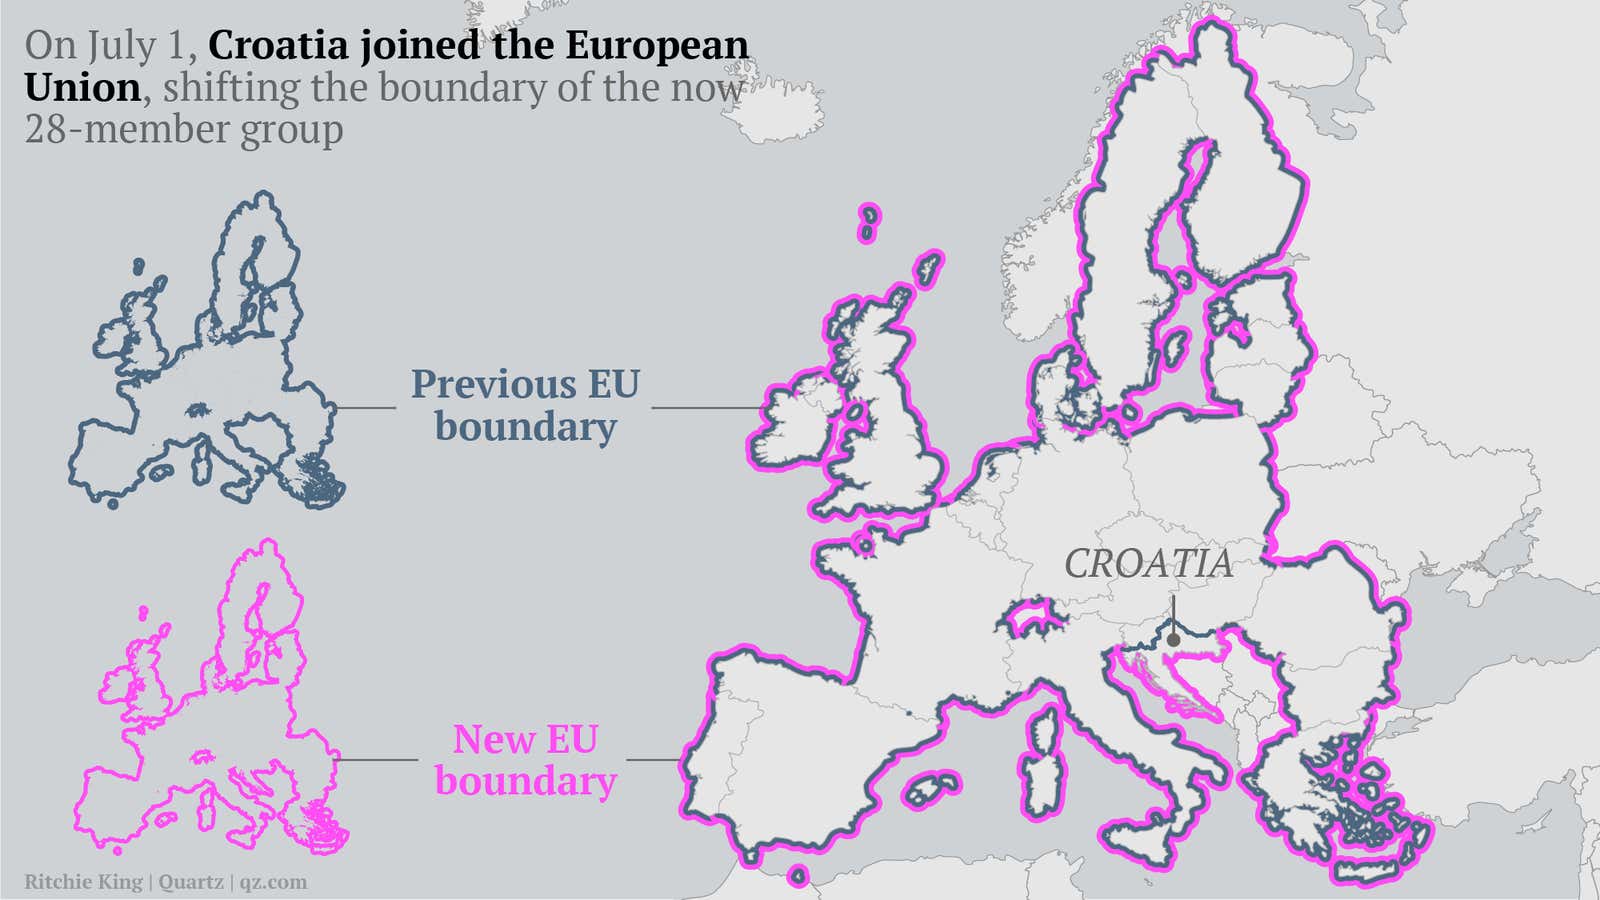 The EU just gained 850 miles of borderland and a new 1,100-mile coast